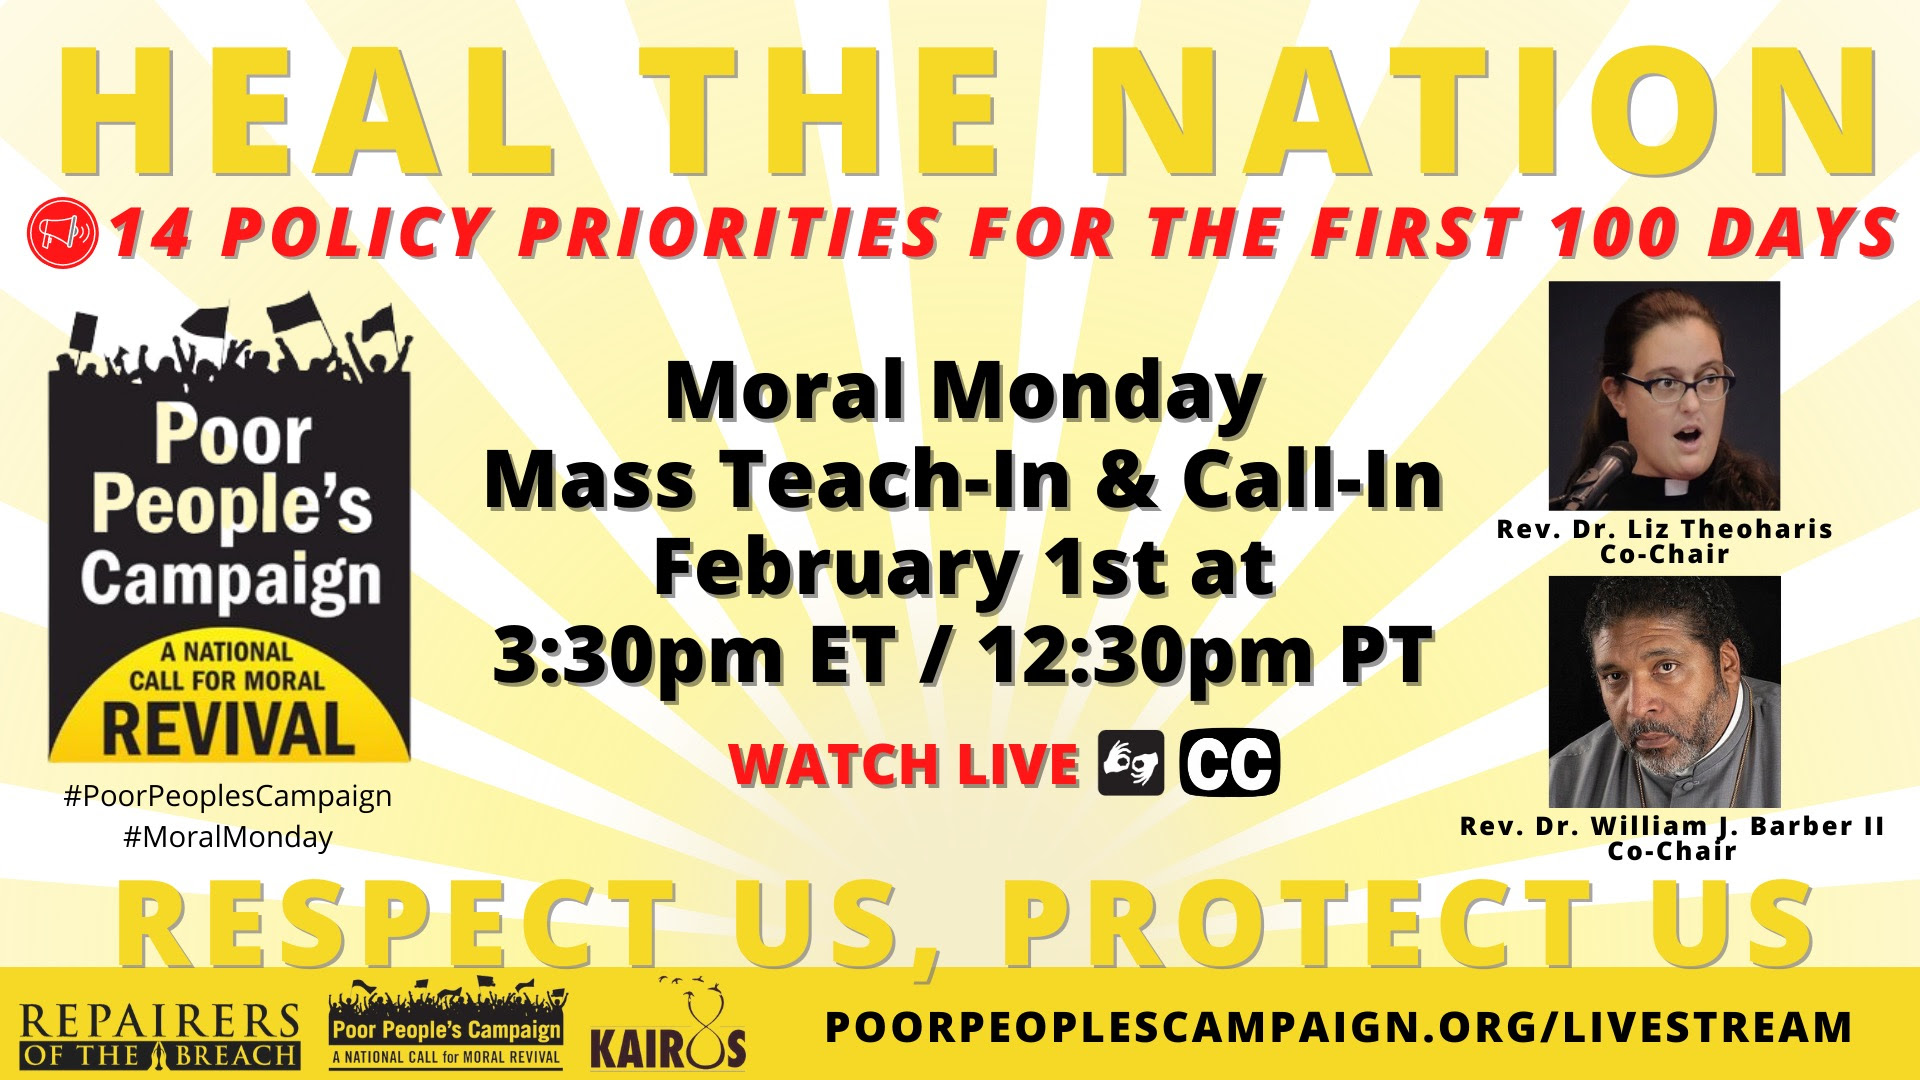 https://www.poorpeoplescampaign.org/livestream/?link_id=0&can_id=2741d62511112bf250bd31d6ae229ef6&source=email-to-heal-the-nation-respect-us-protect-us&email_referrer=email_1057791&email_subject=to-heal-the-nation-respect-us-protect-us